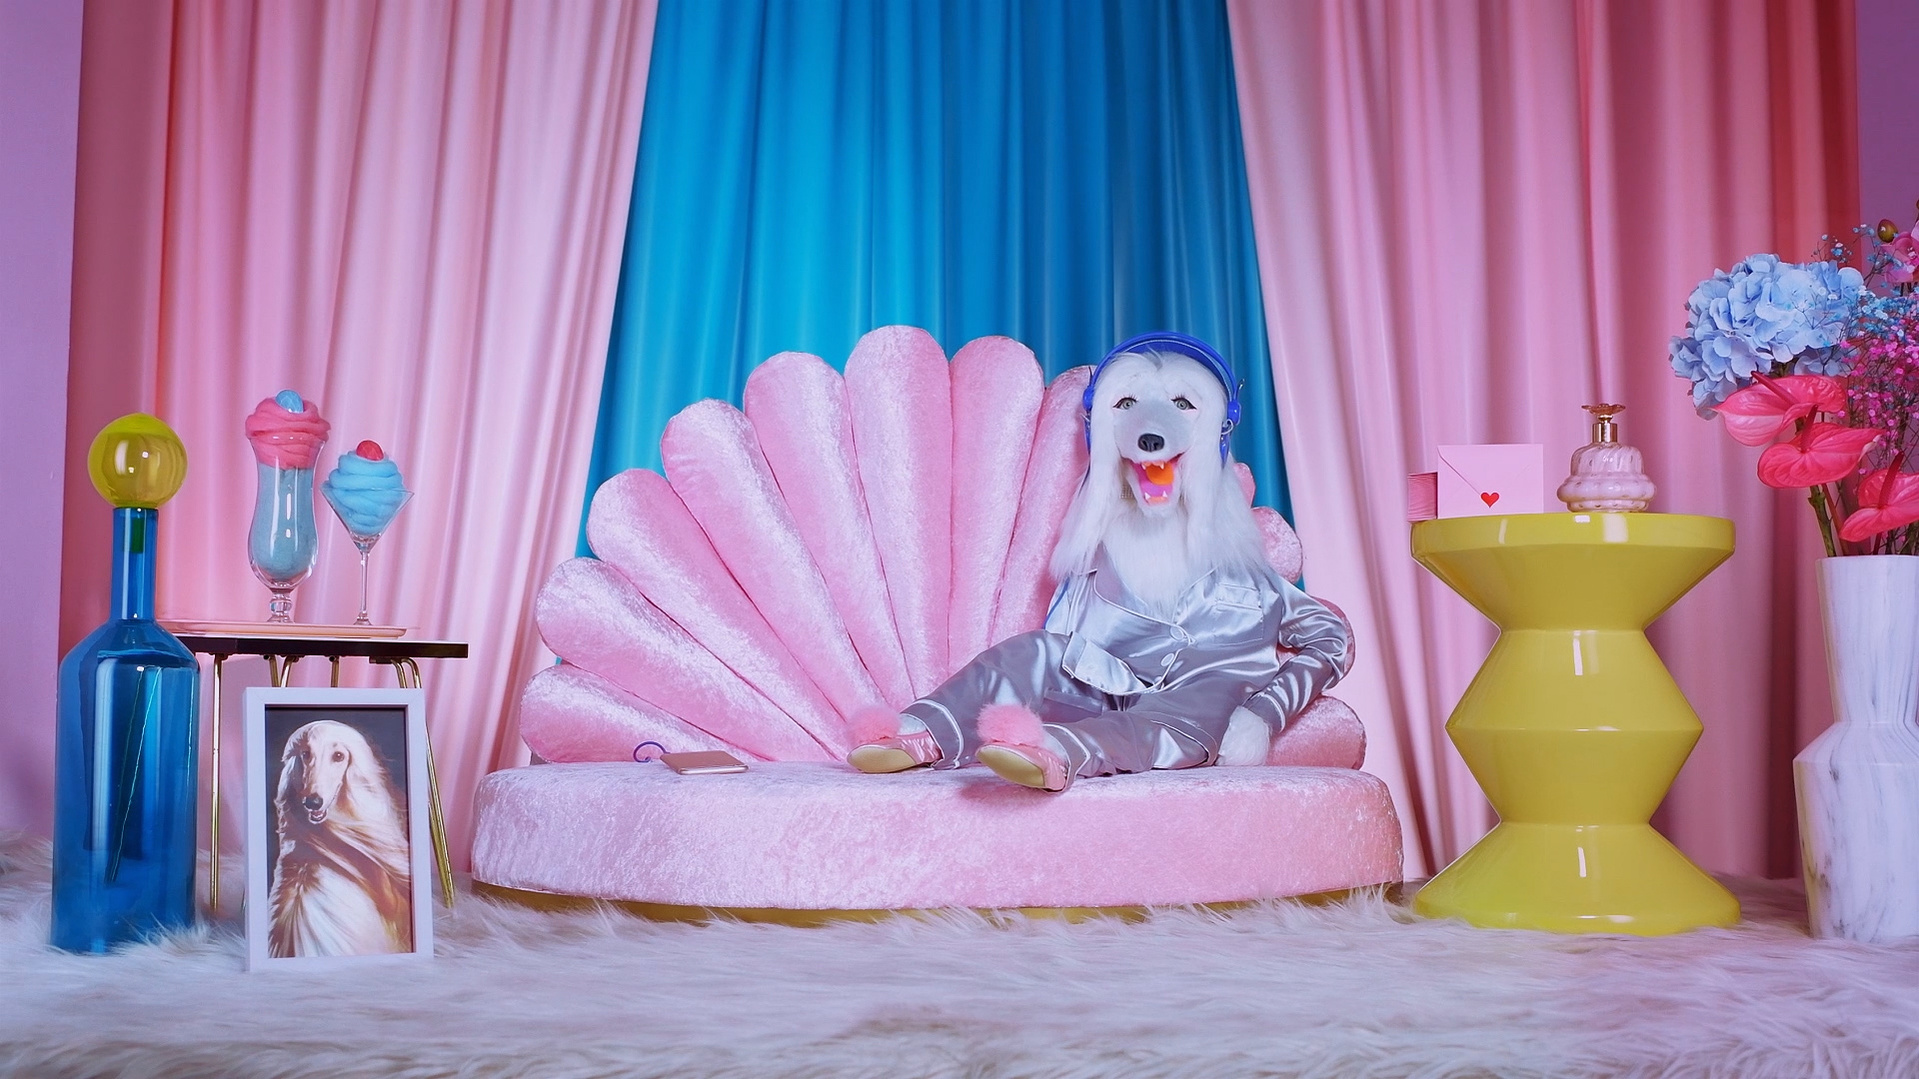 Behind the scene of the Dear Klarna shoot, with Lola Lavish an Afghan greyhound puppet sitting in a pink background. 
Direction + Character design & Puppet Making by Ben&Julia Studio // Agency: DOJO Berlin